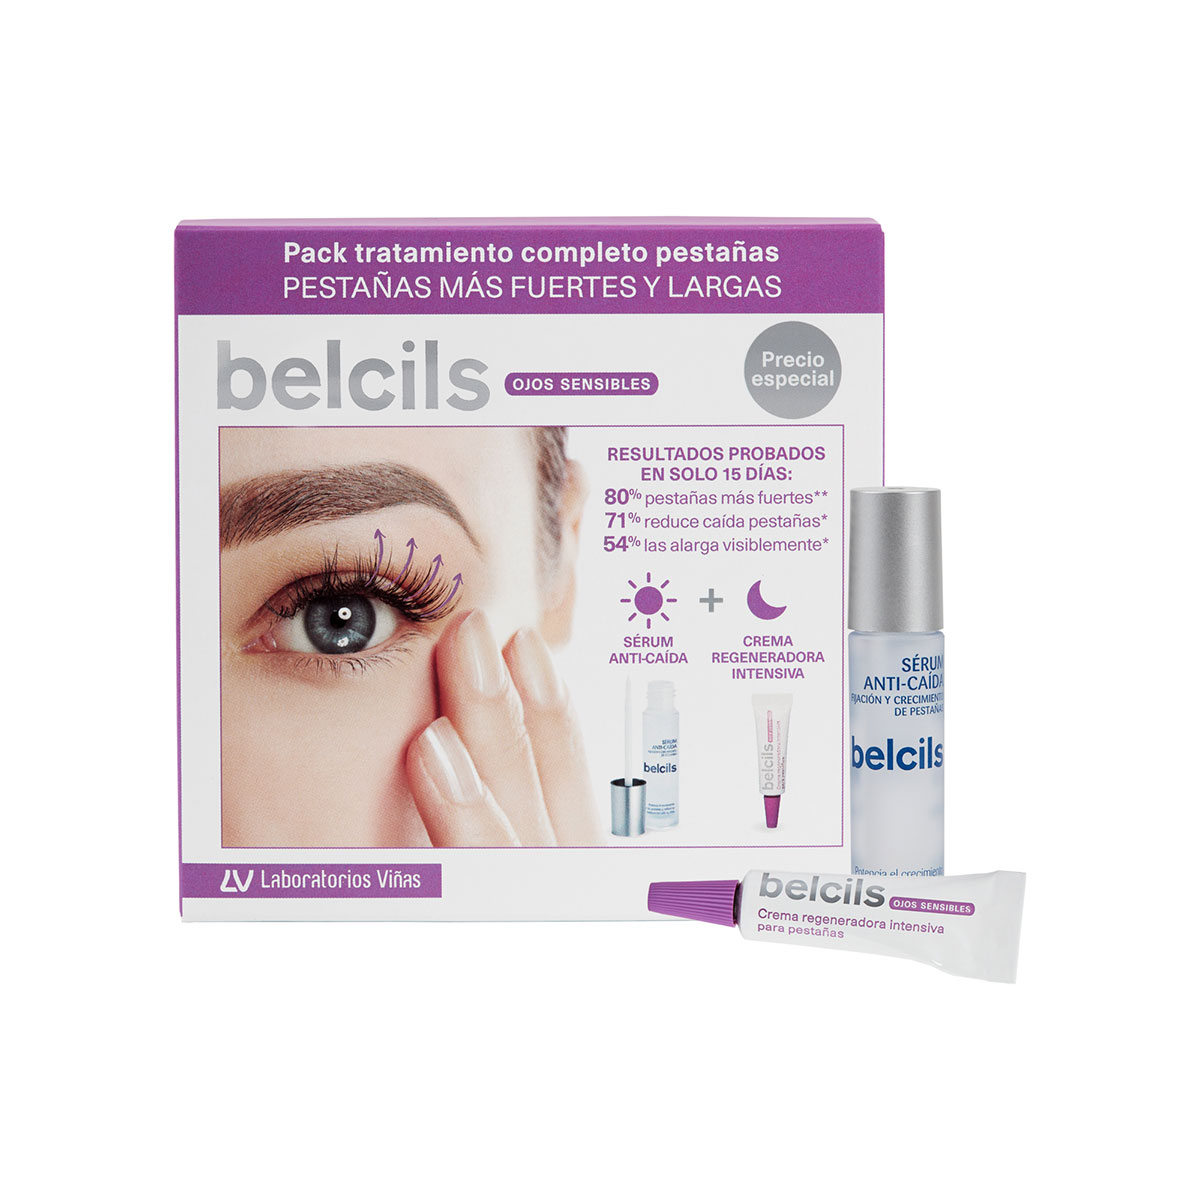 PACK-PESTA•AS-TRATAMIENTO-COMPLETO-PRODUCTO_29,25€